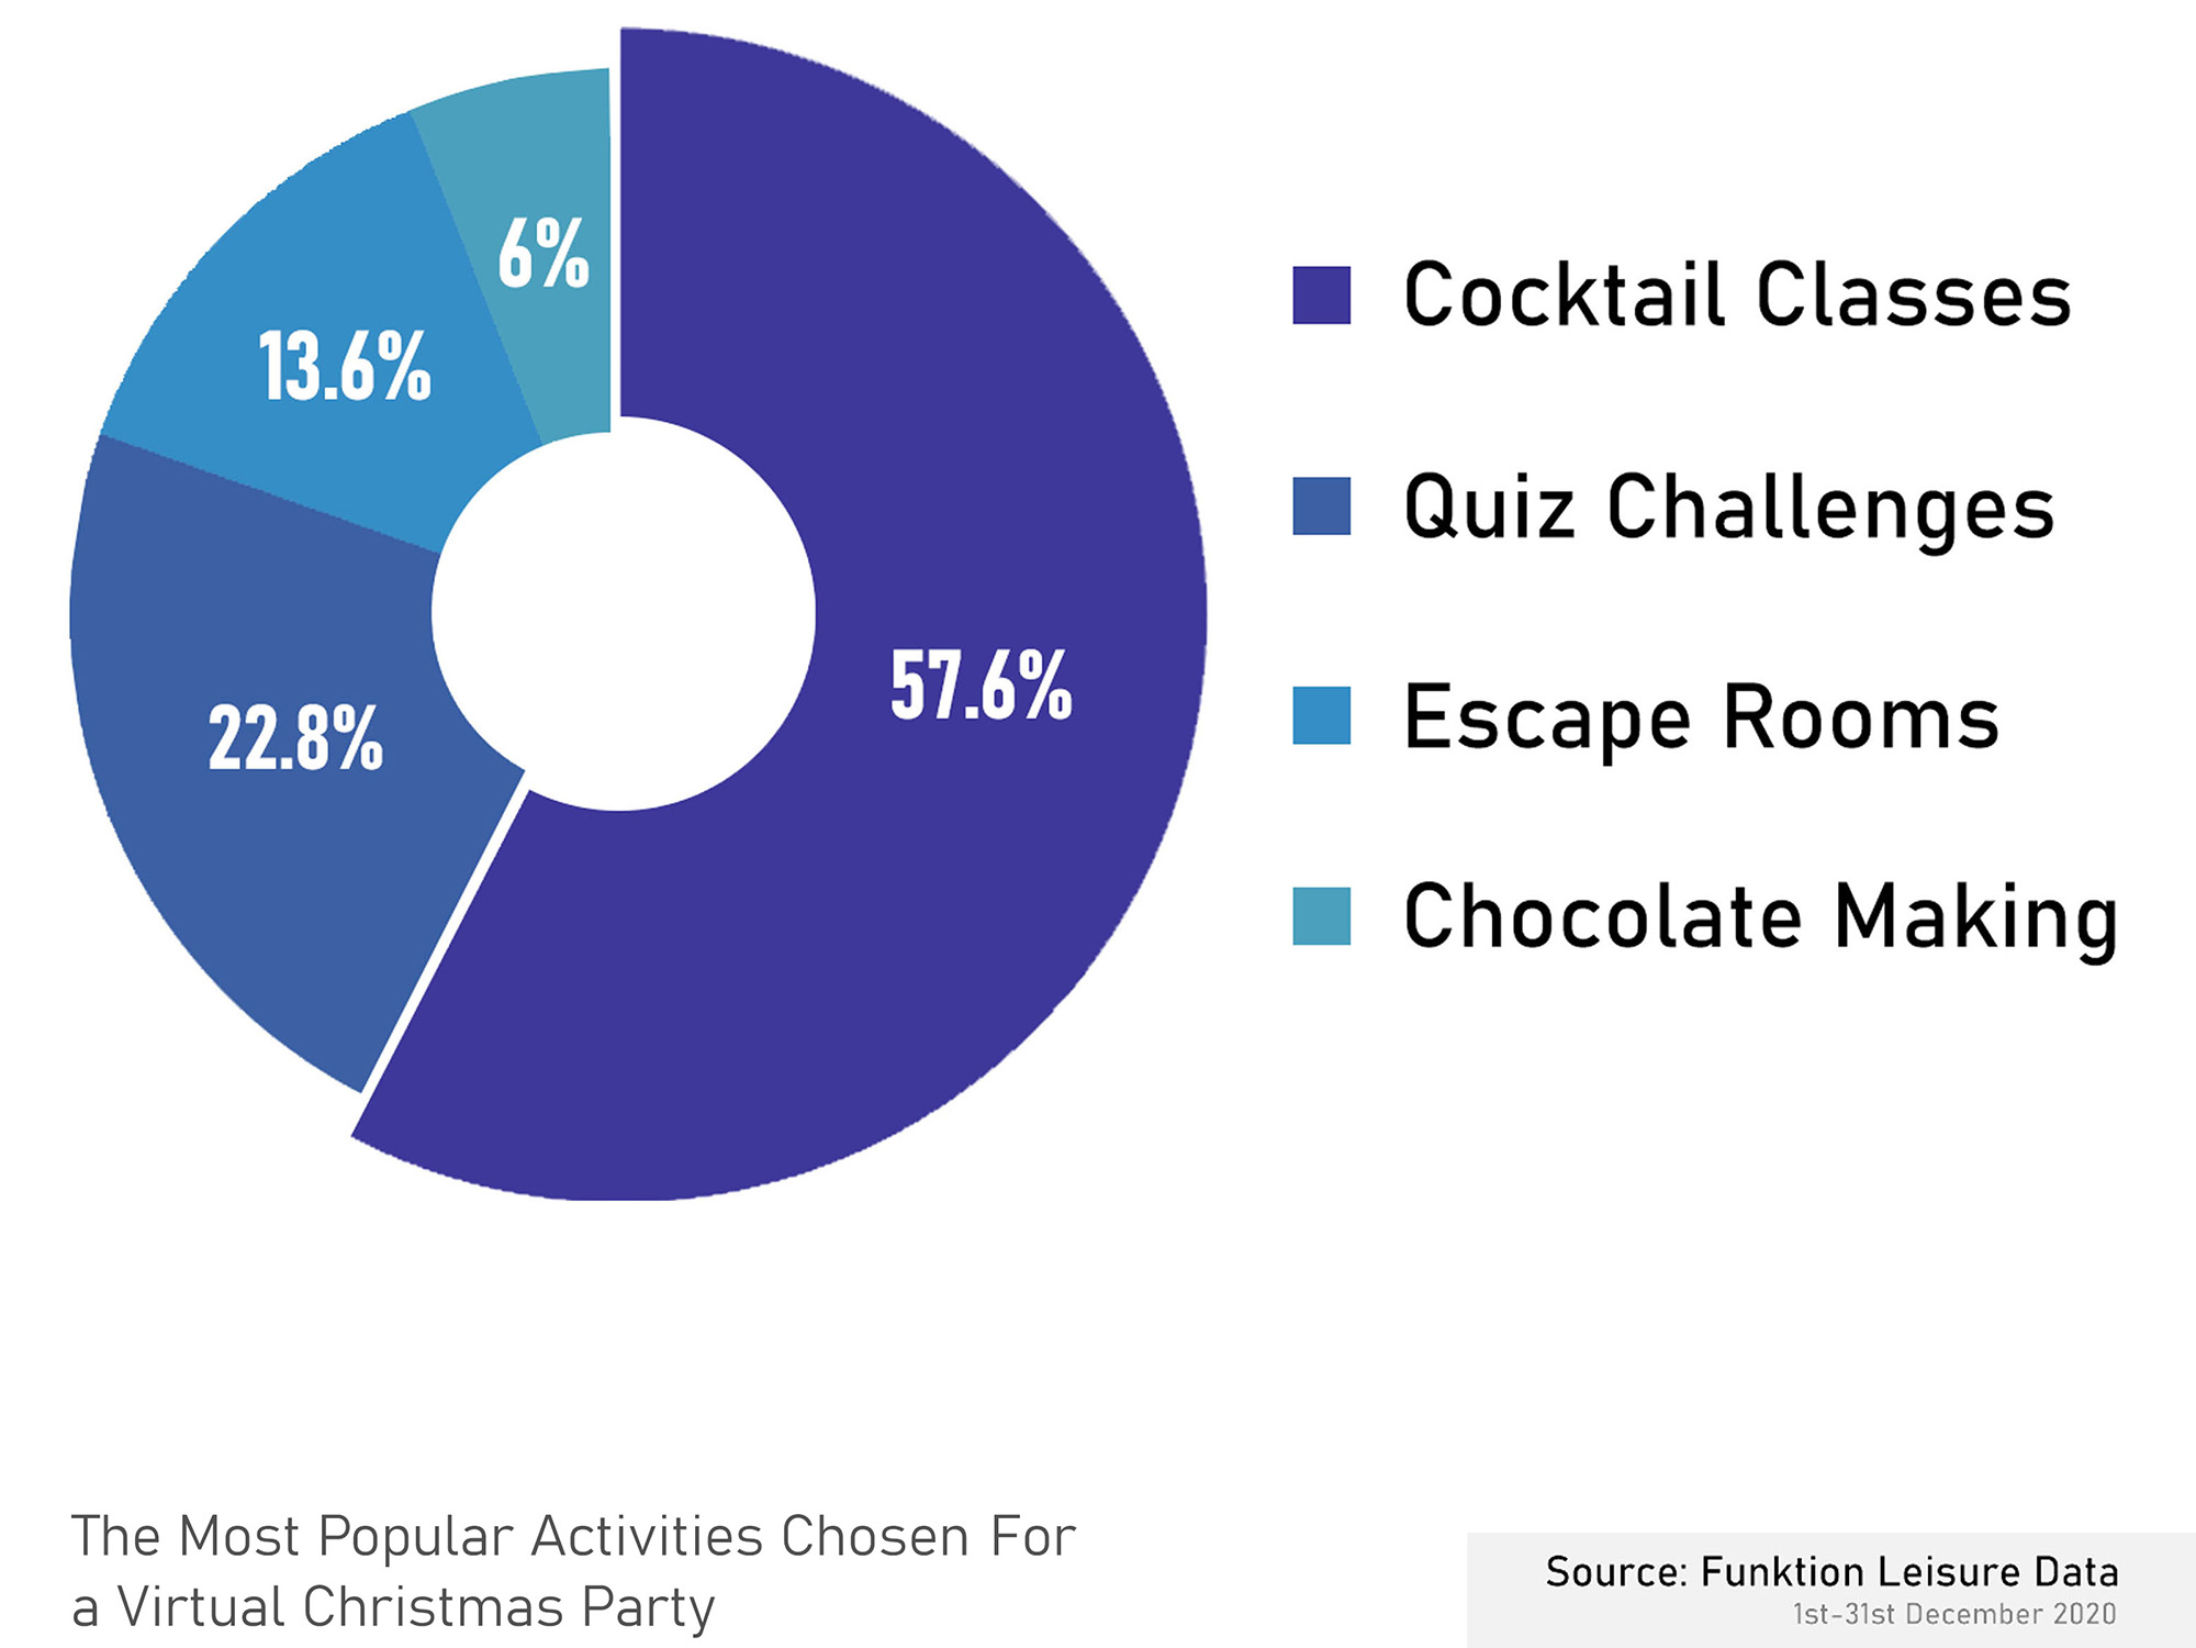 The Most Popular Activities Chosen for a Virtual Christmas Party